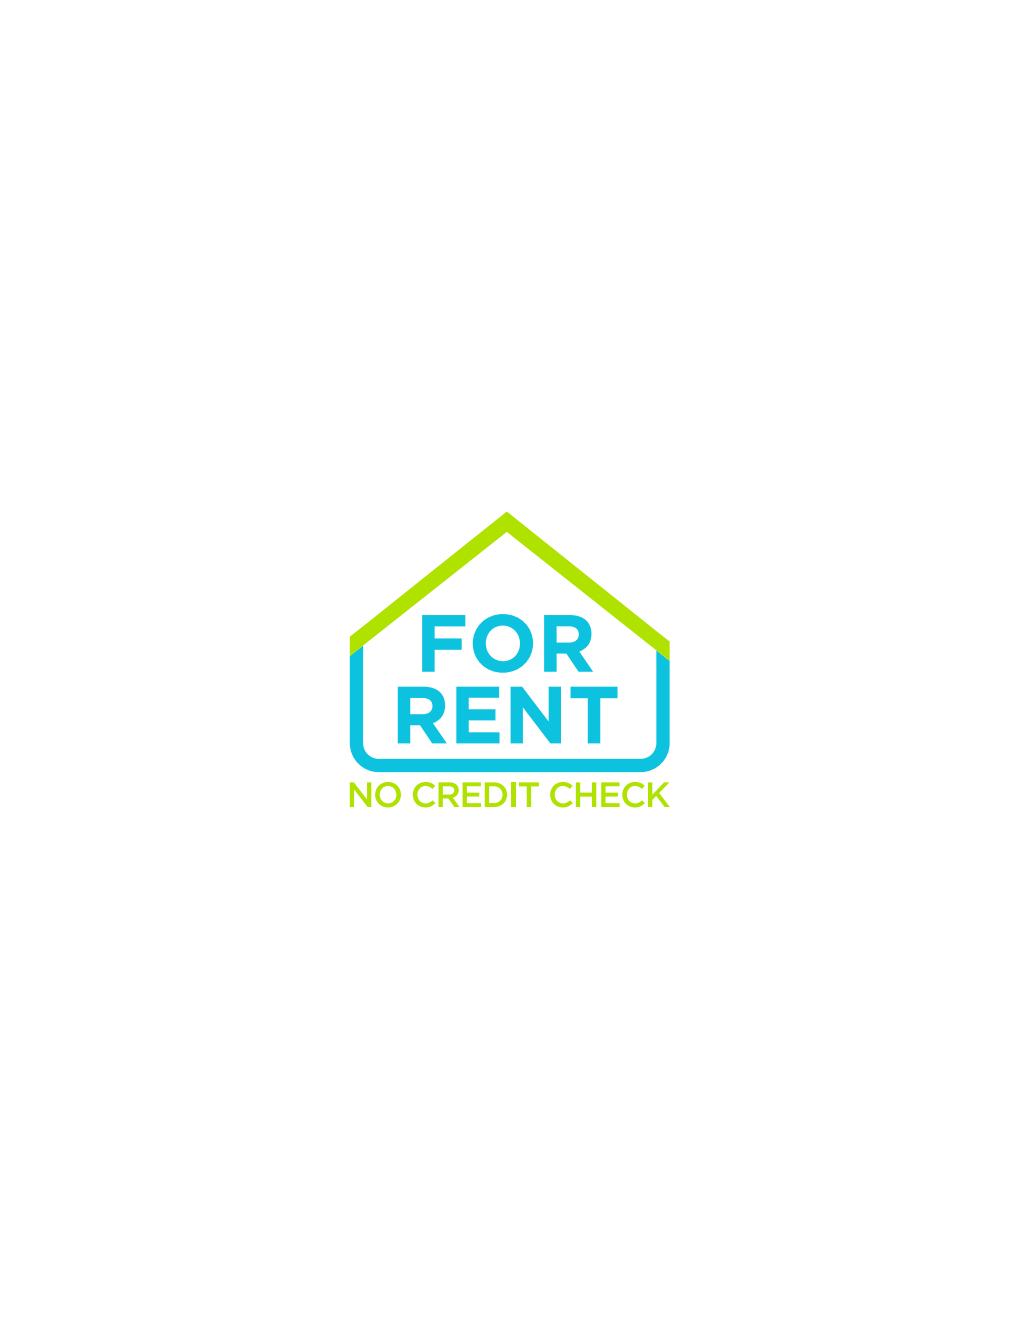 Company logo of Luxury No Credit Check Apartment Approval Service